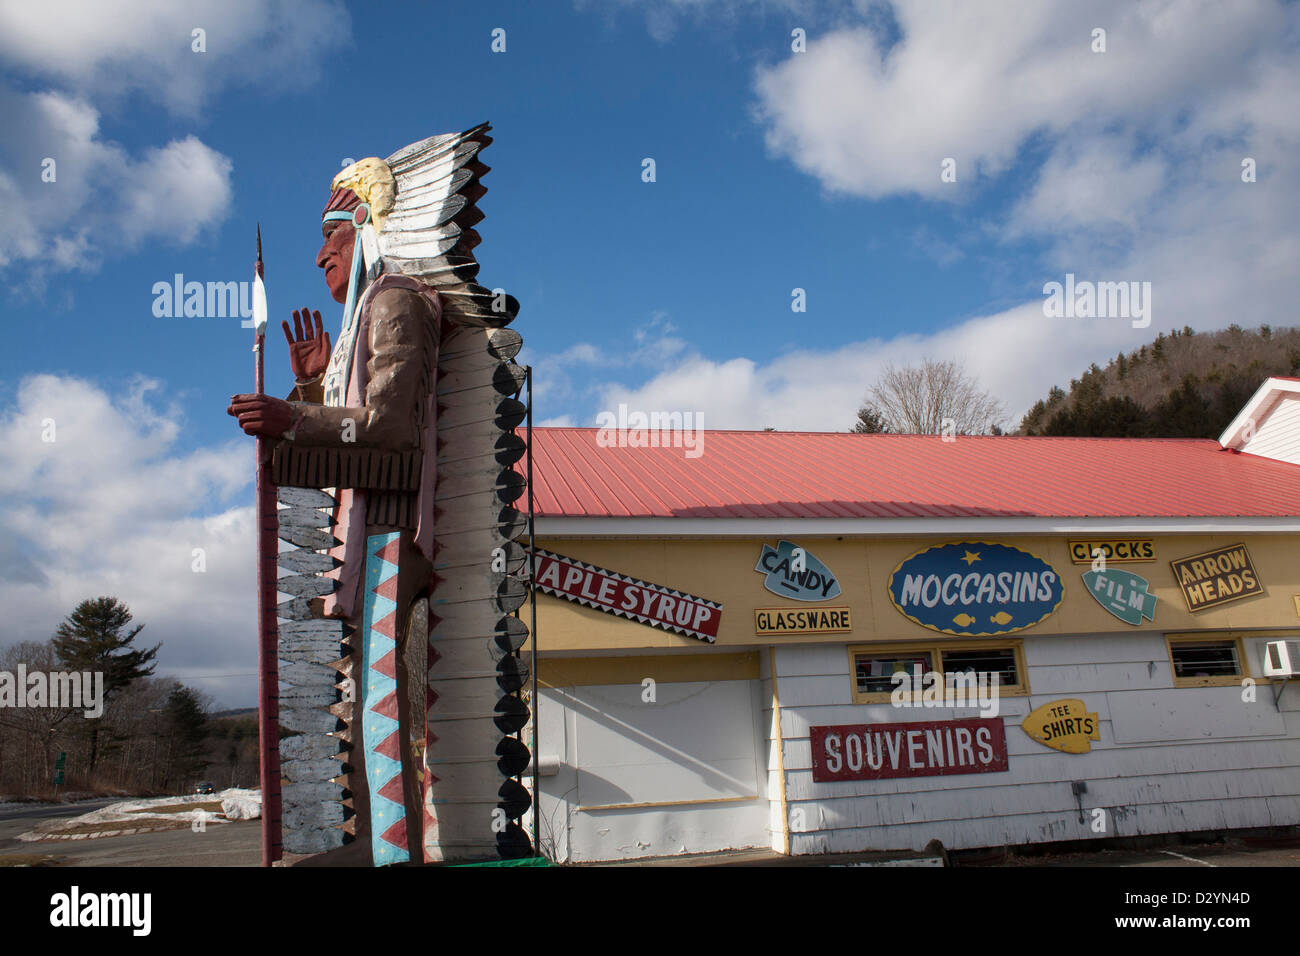 A tourist shop with Native American goods and a giant sculpture in New England is closed for the winter season. Stock Photo